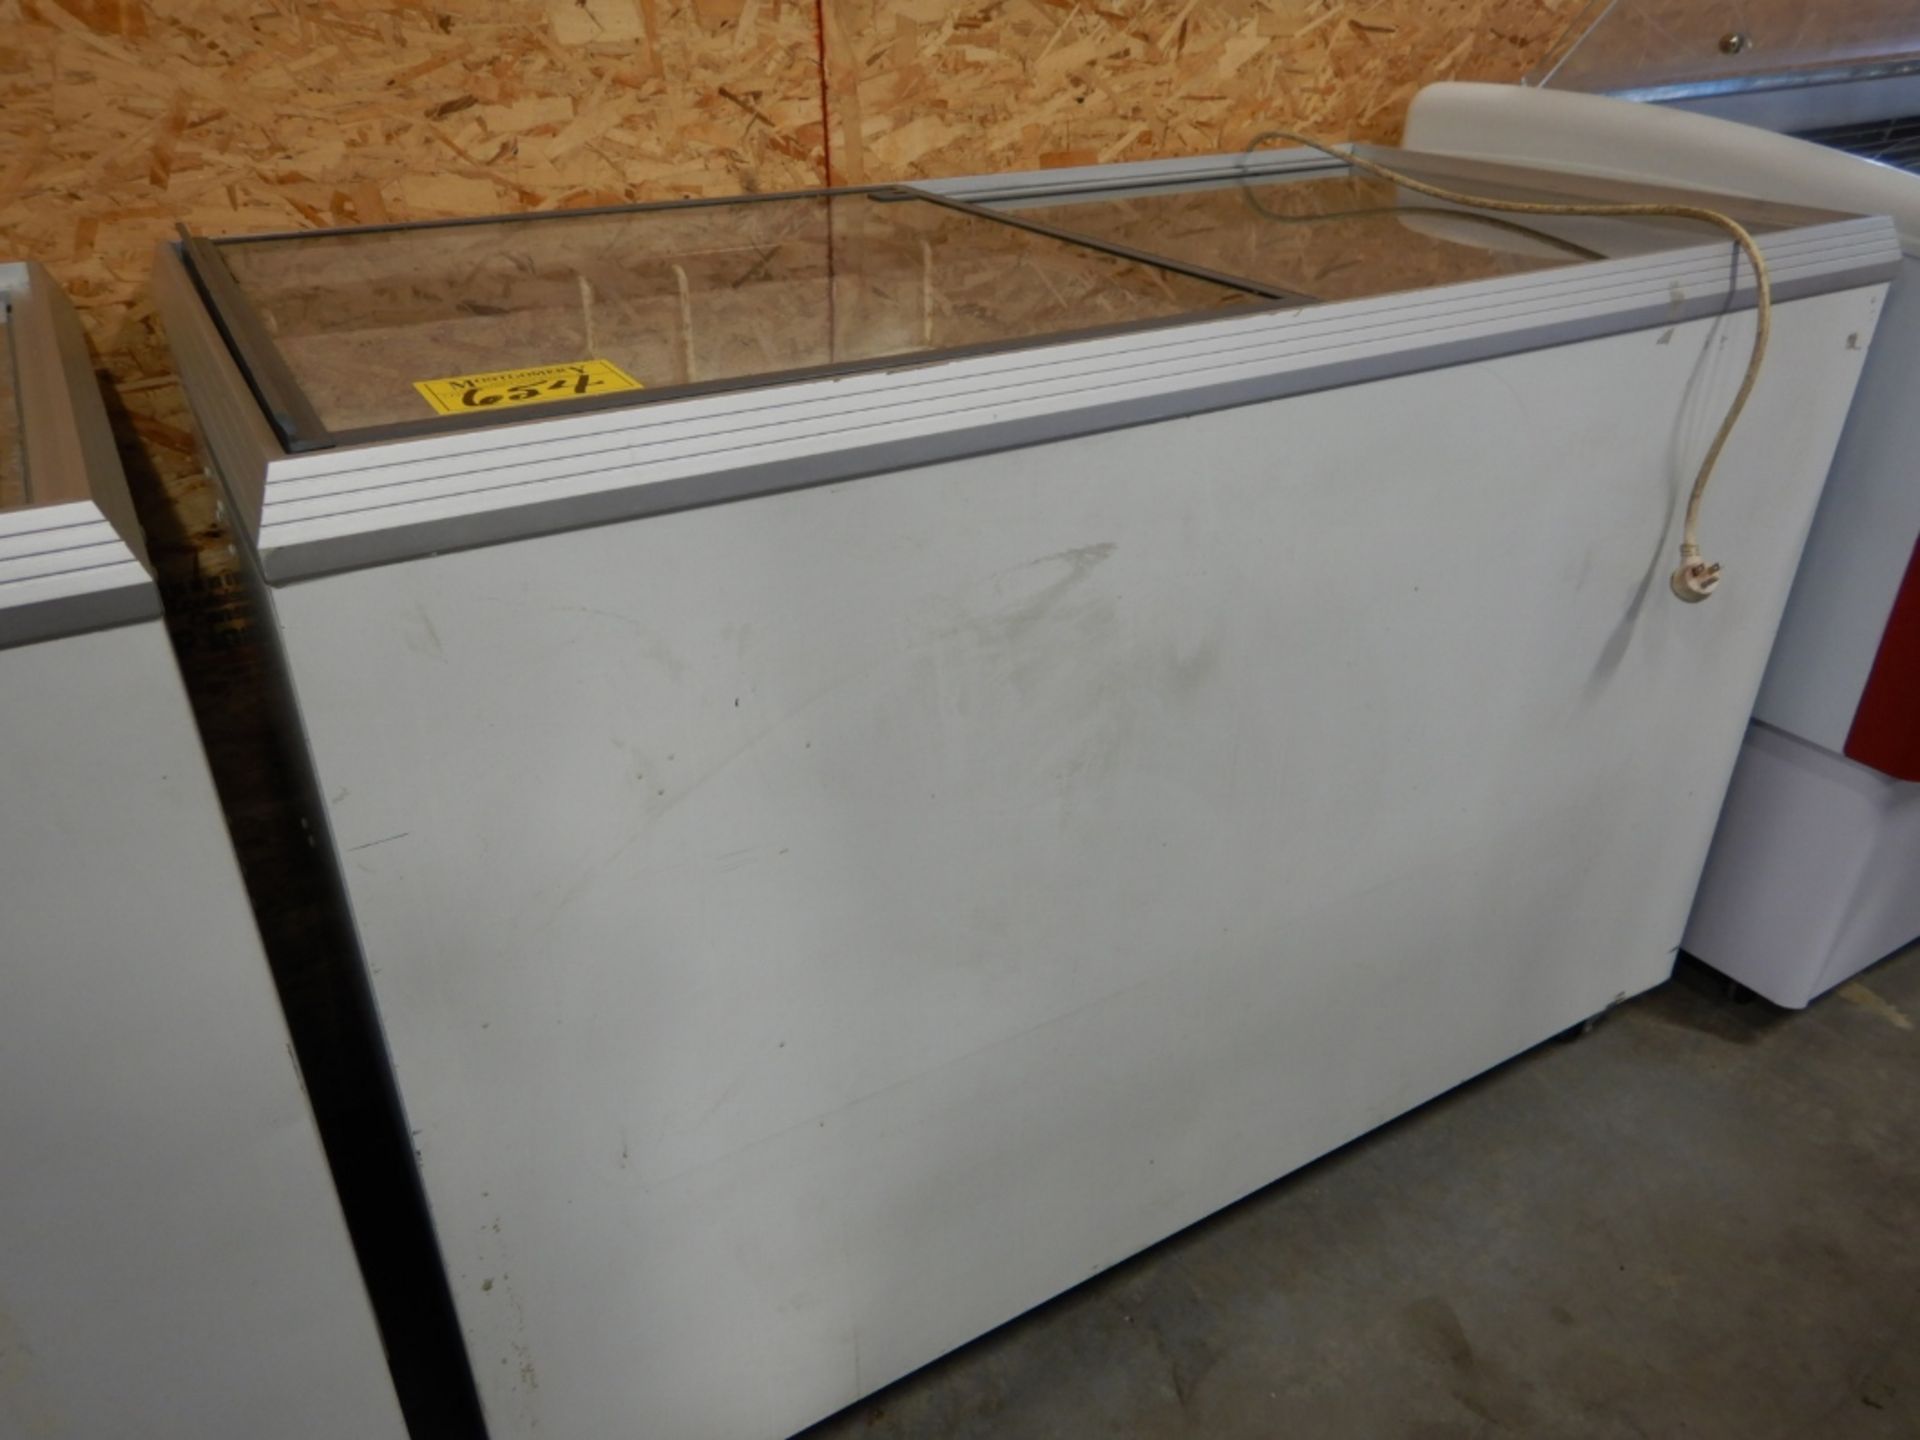 CARAVELL 445 51” COM. FREEZER W/SLIDING LID (HARD ICE CREAM DIPPING CABINET) W/CASTERS, TUB INSERTS,